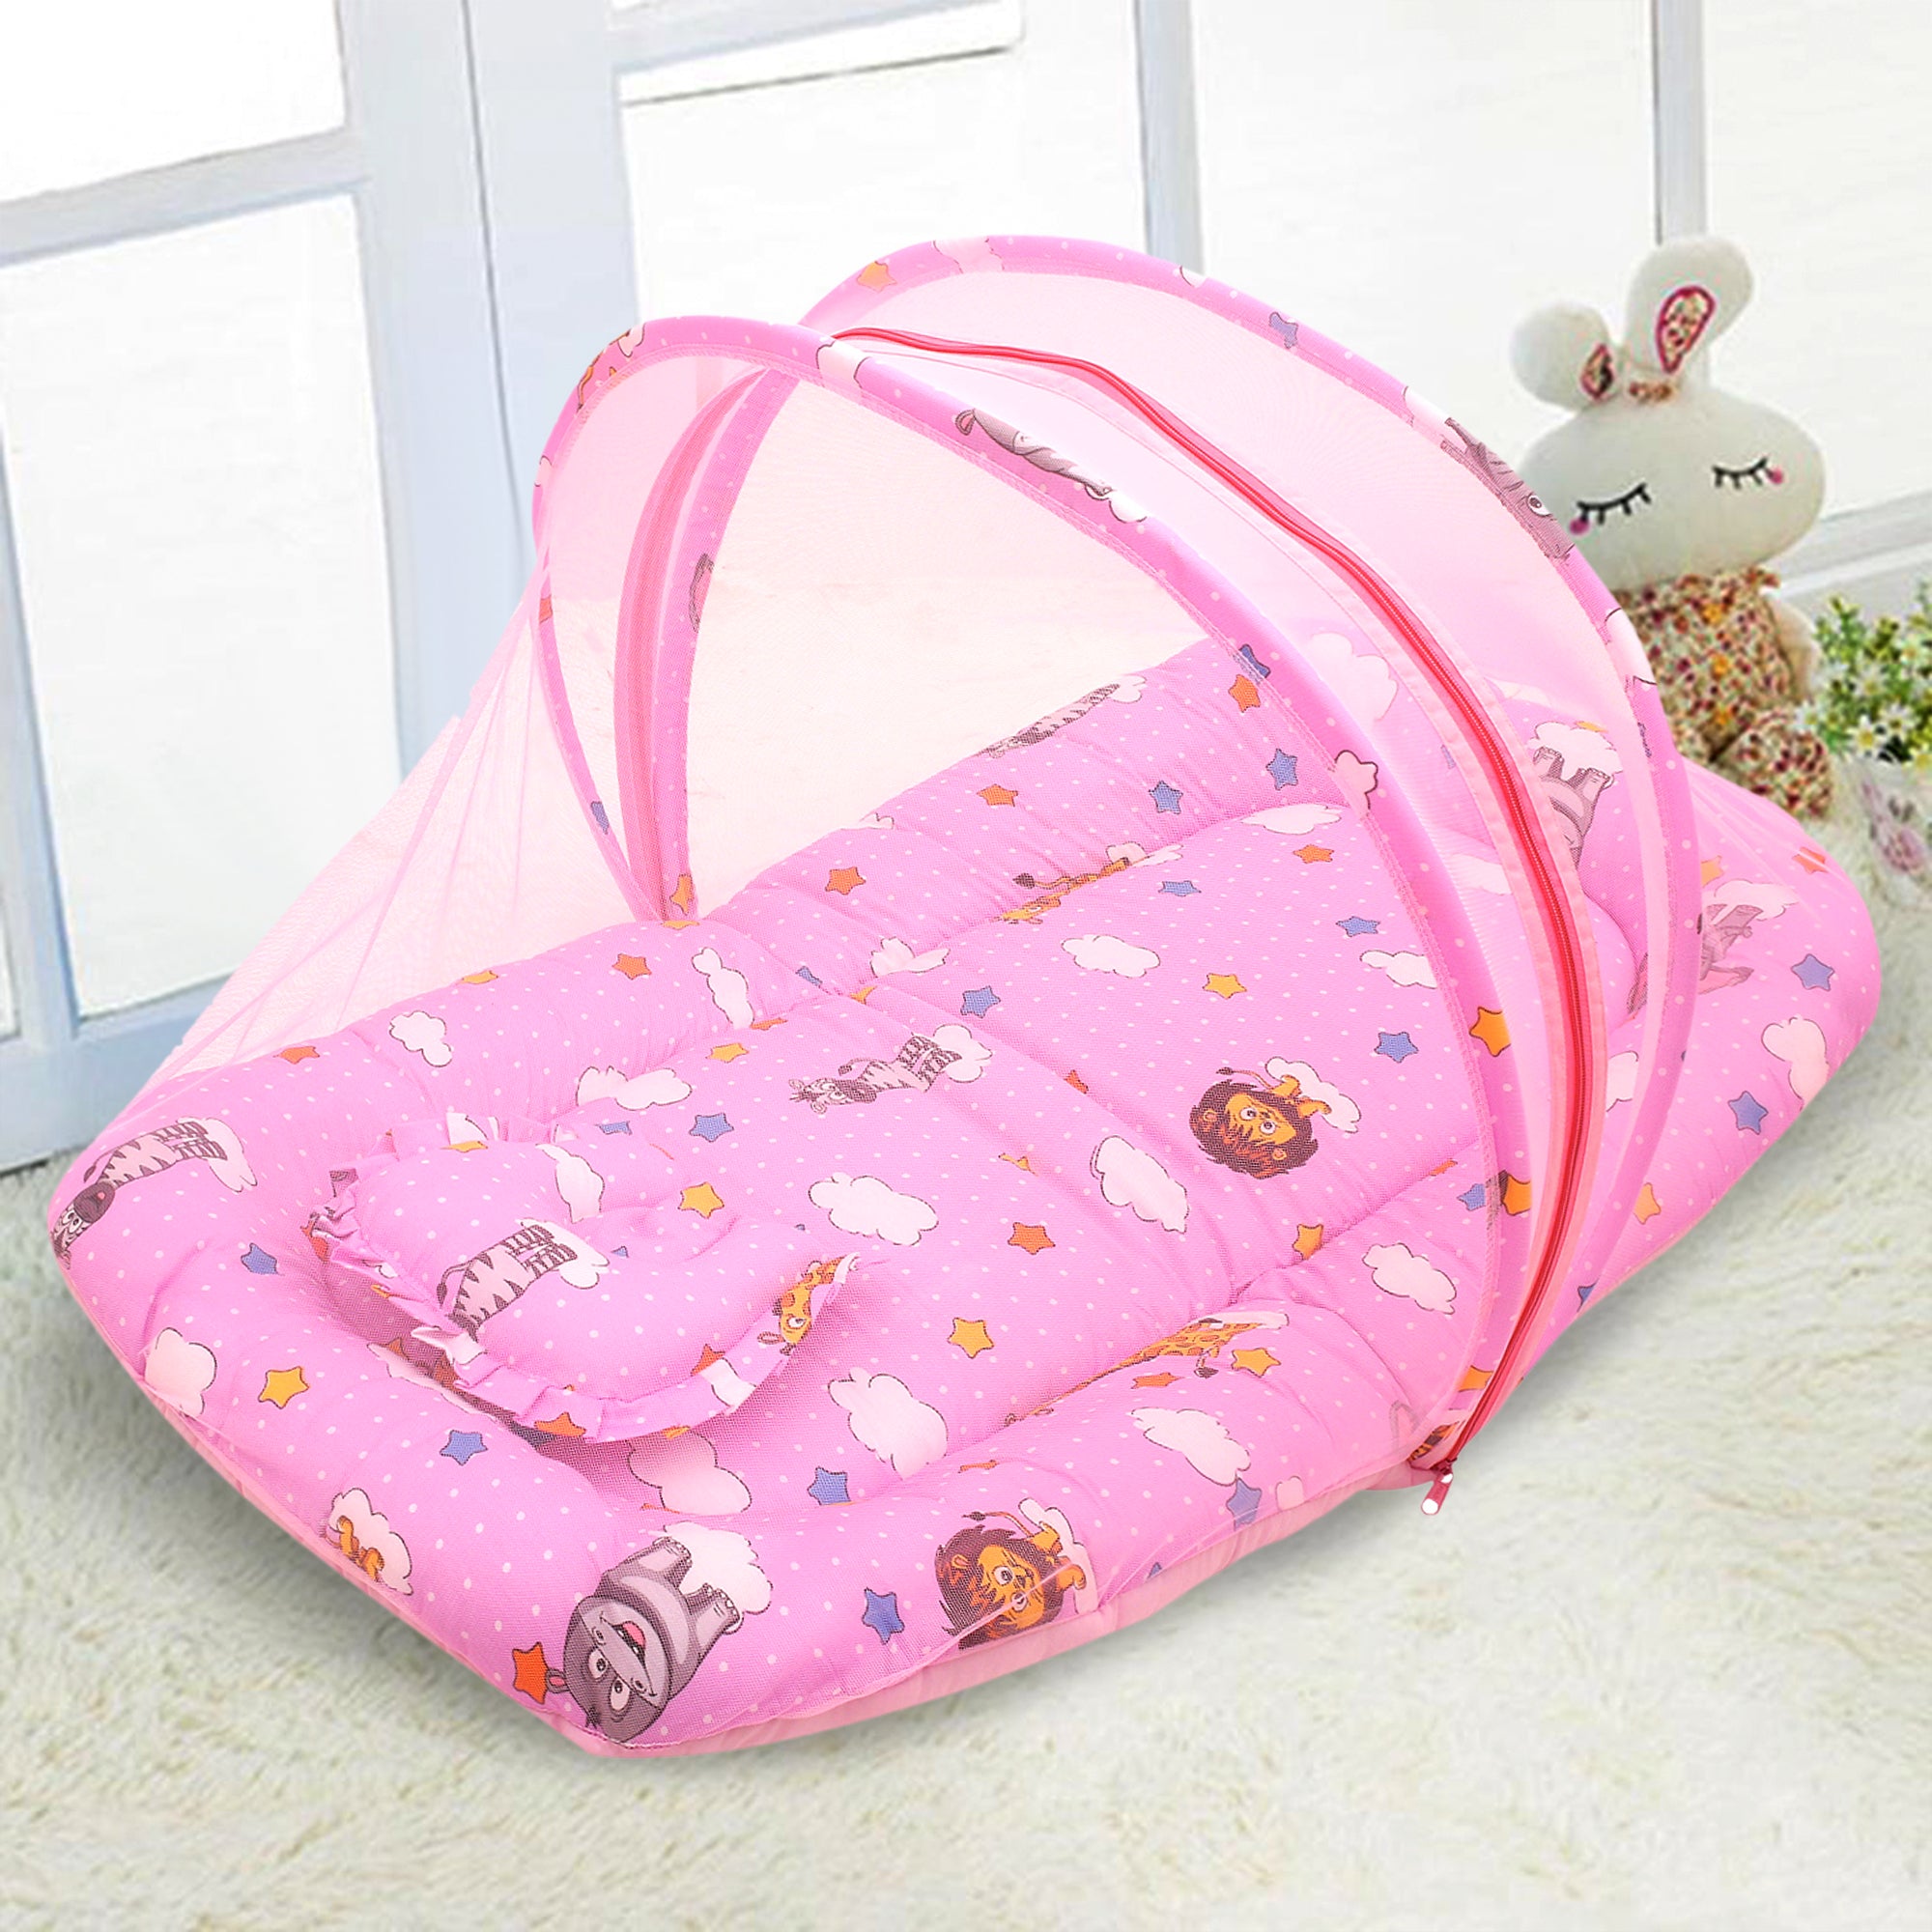 Mosquito Net Tent Mattress Set With Neck Pillow Flying Animals Pink